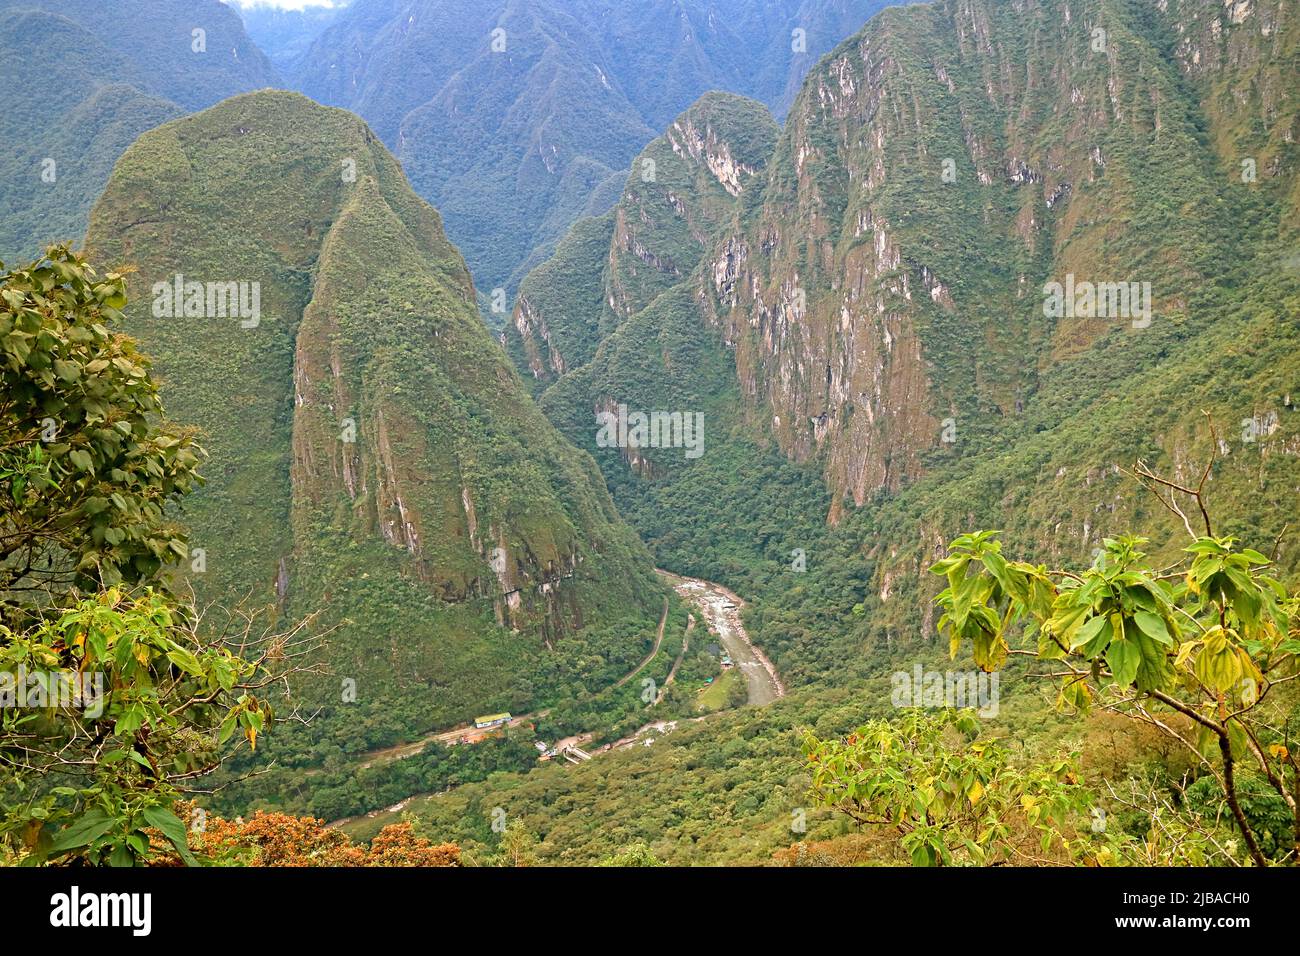 Incredible Aerial View of Aguas Calientes Town and Urubamba River as Seen from Mt. Huayna Picchu, Machu Picchu, Cusco Region of Peru Stock Photo